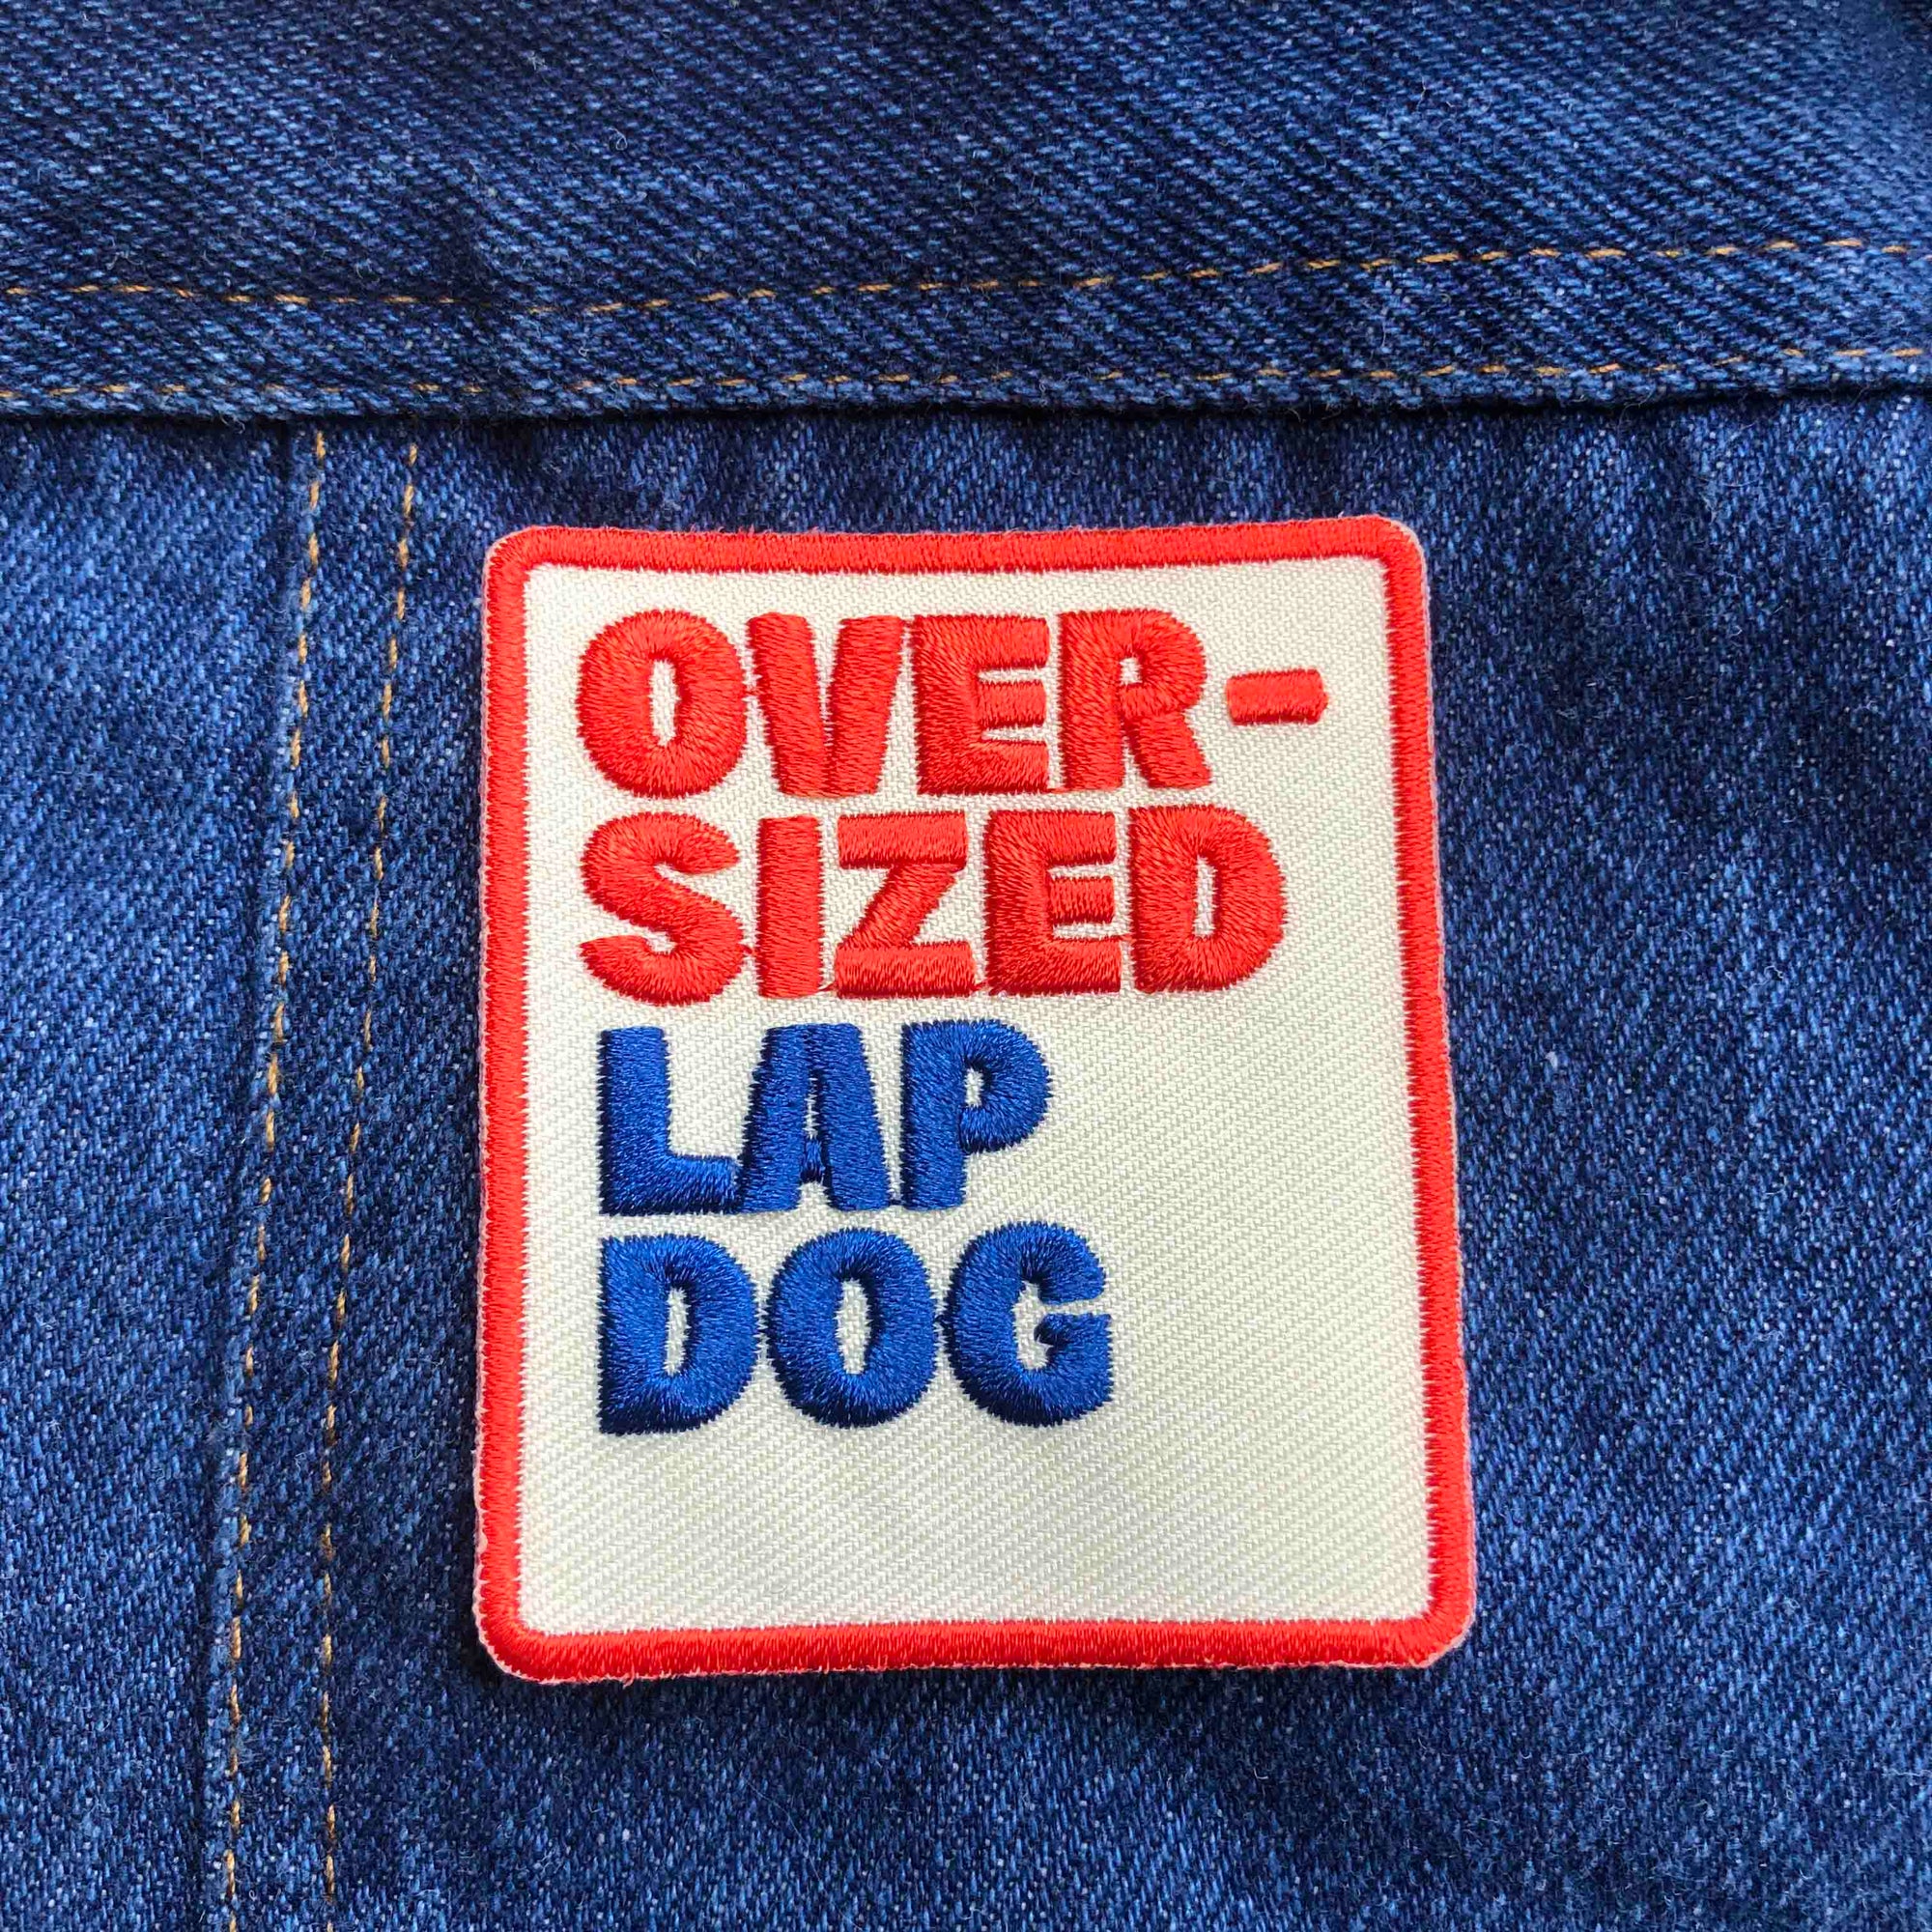 Oversized lap dog patch, Scouts Honour merit badge for dogs, large dog patch